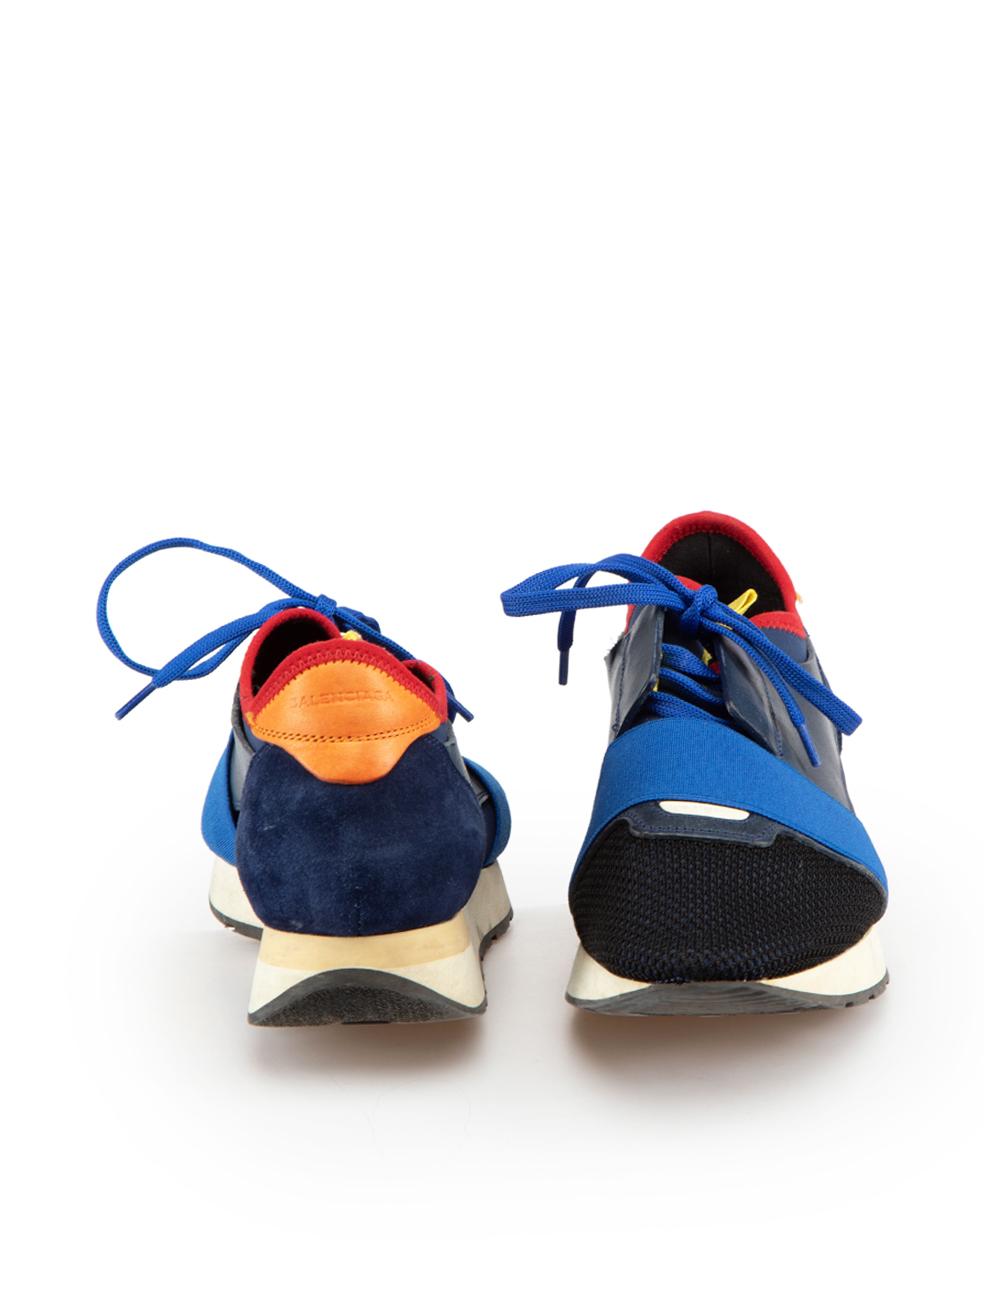 Balenciaga Blue Race Runner Trainers Size IT 39 In Good Condition For Sale In London, GB